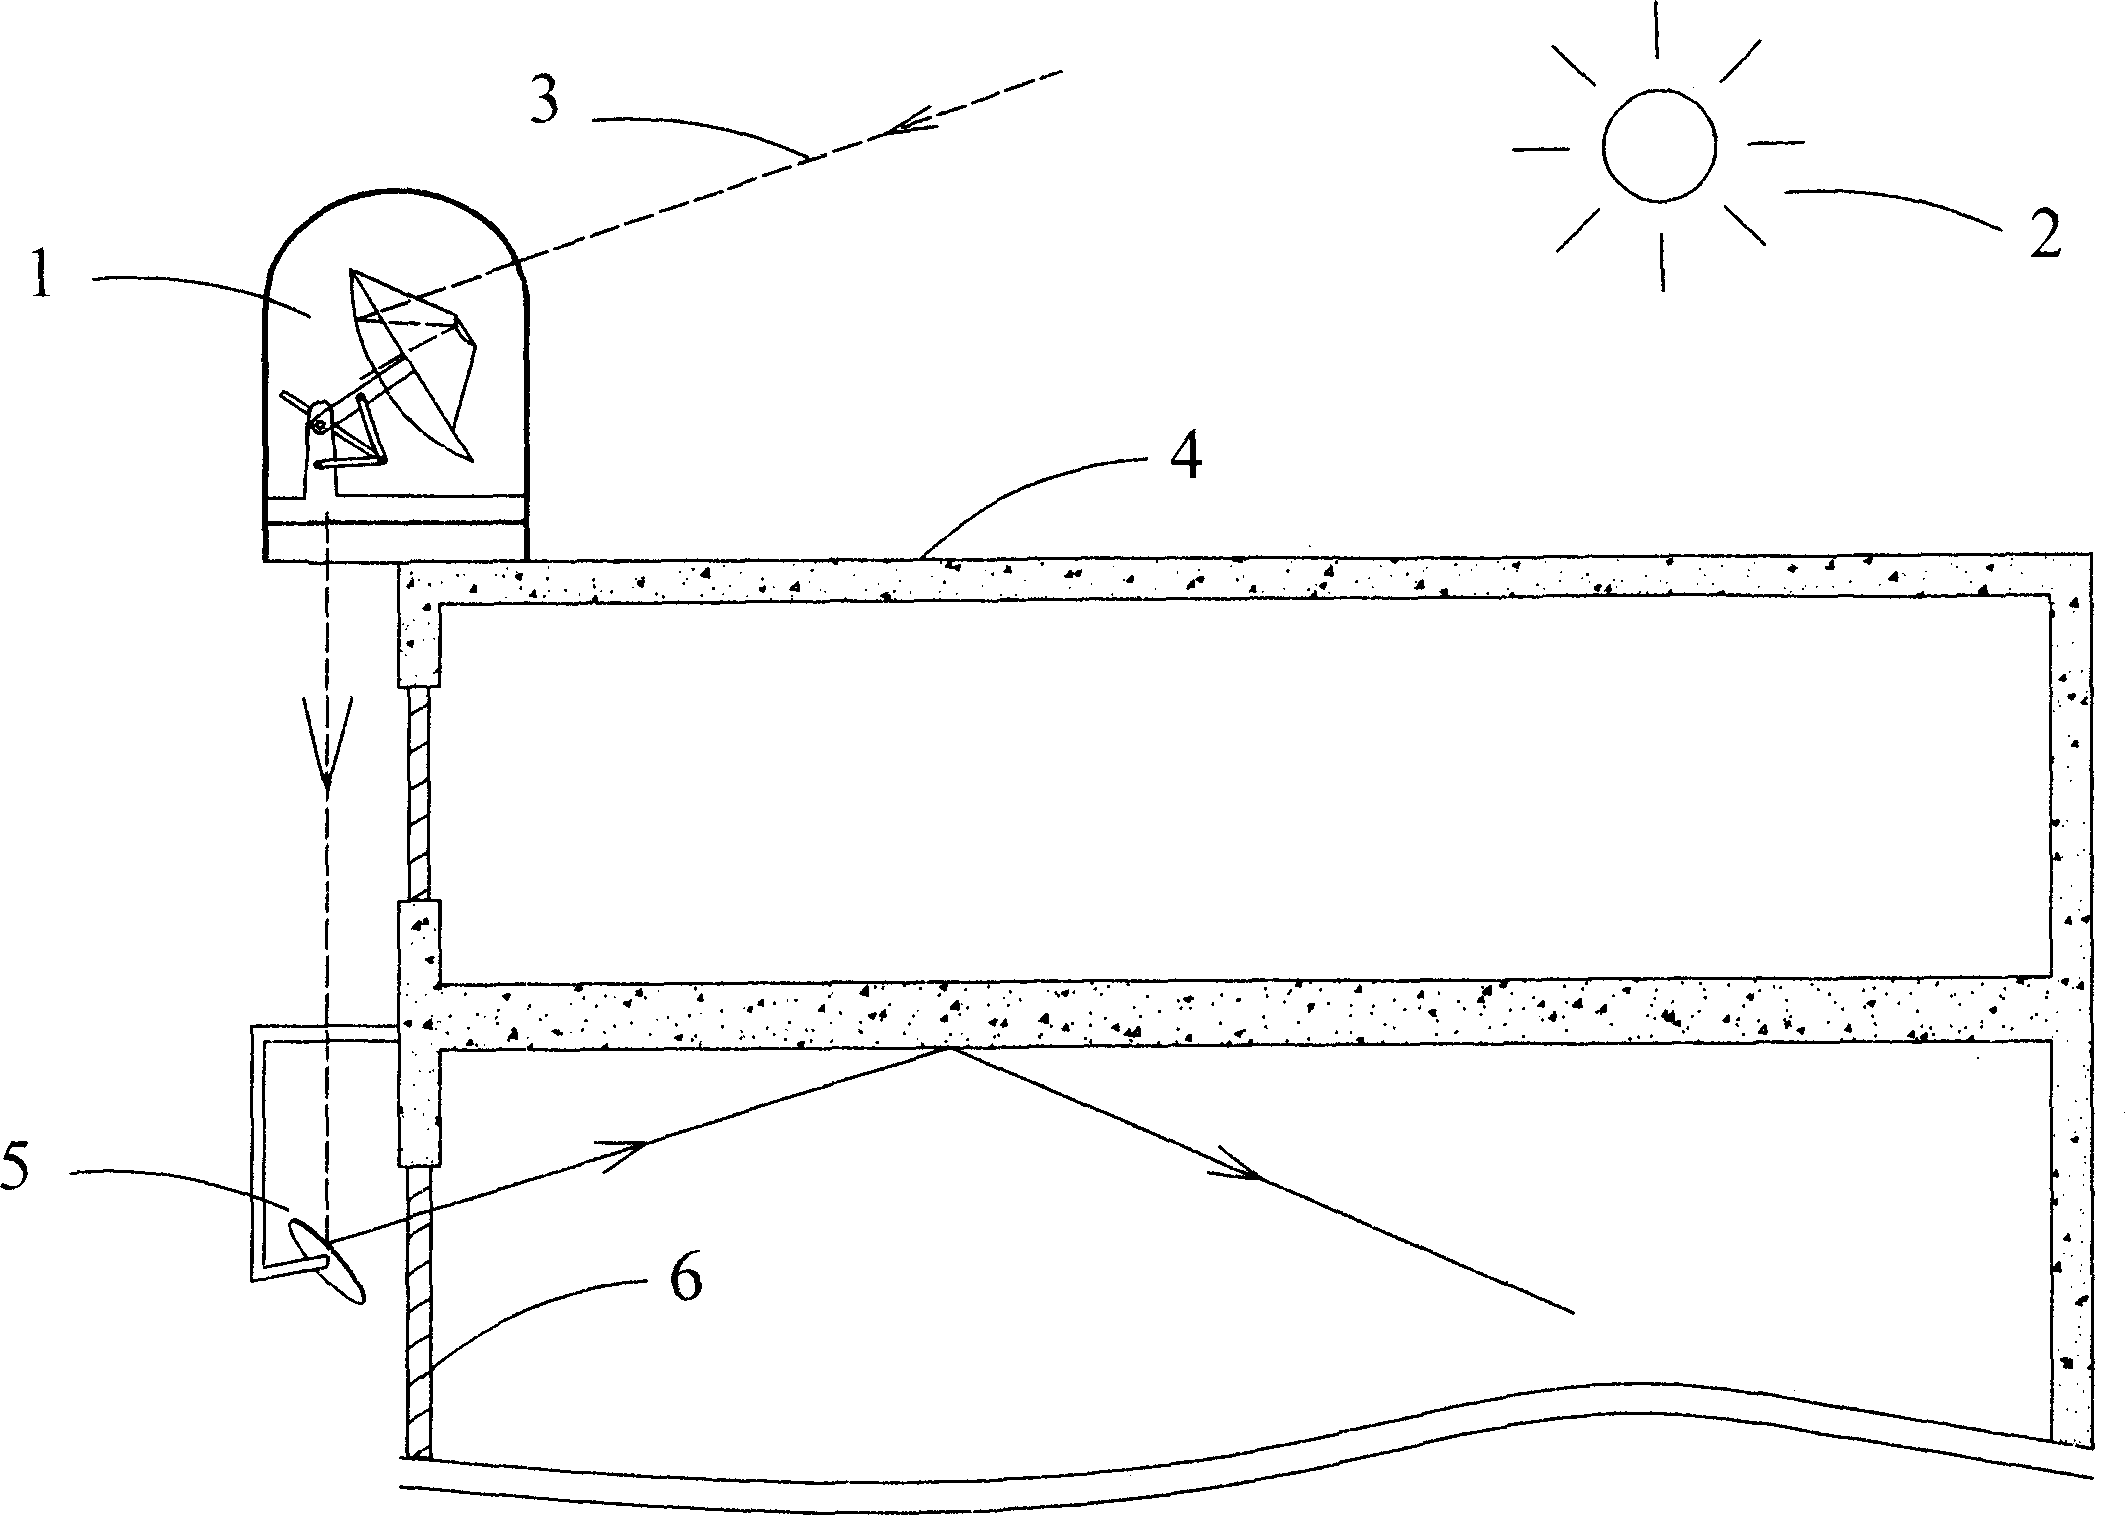 Apparatus for introducing sunlight to room